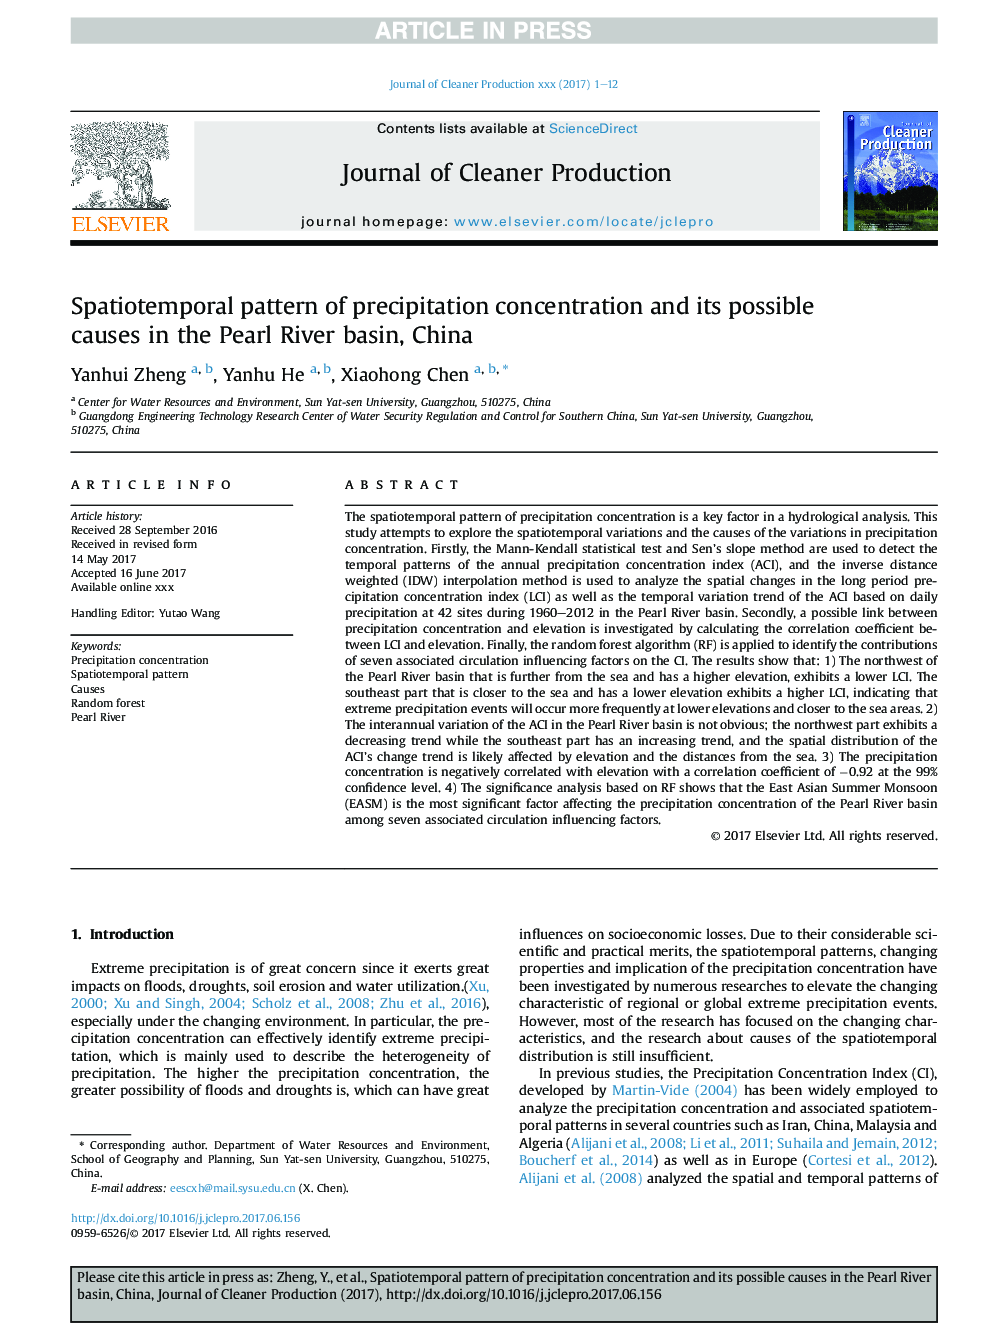 Spatiotemporal pattern of precipitation concentration and its possible causes in the Pearl River basin, China